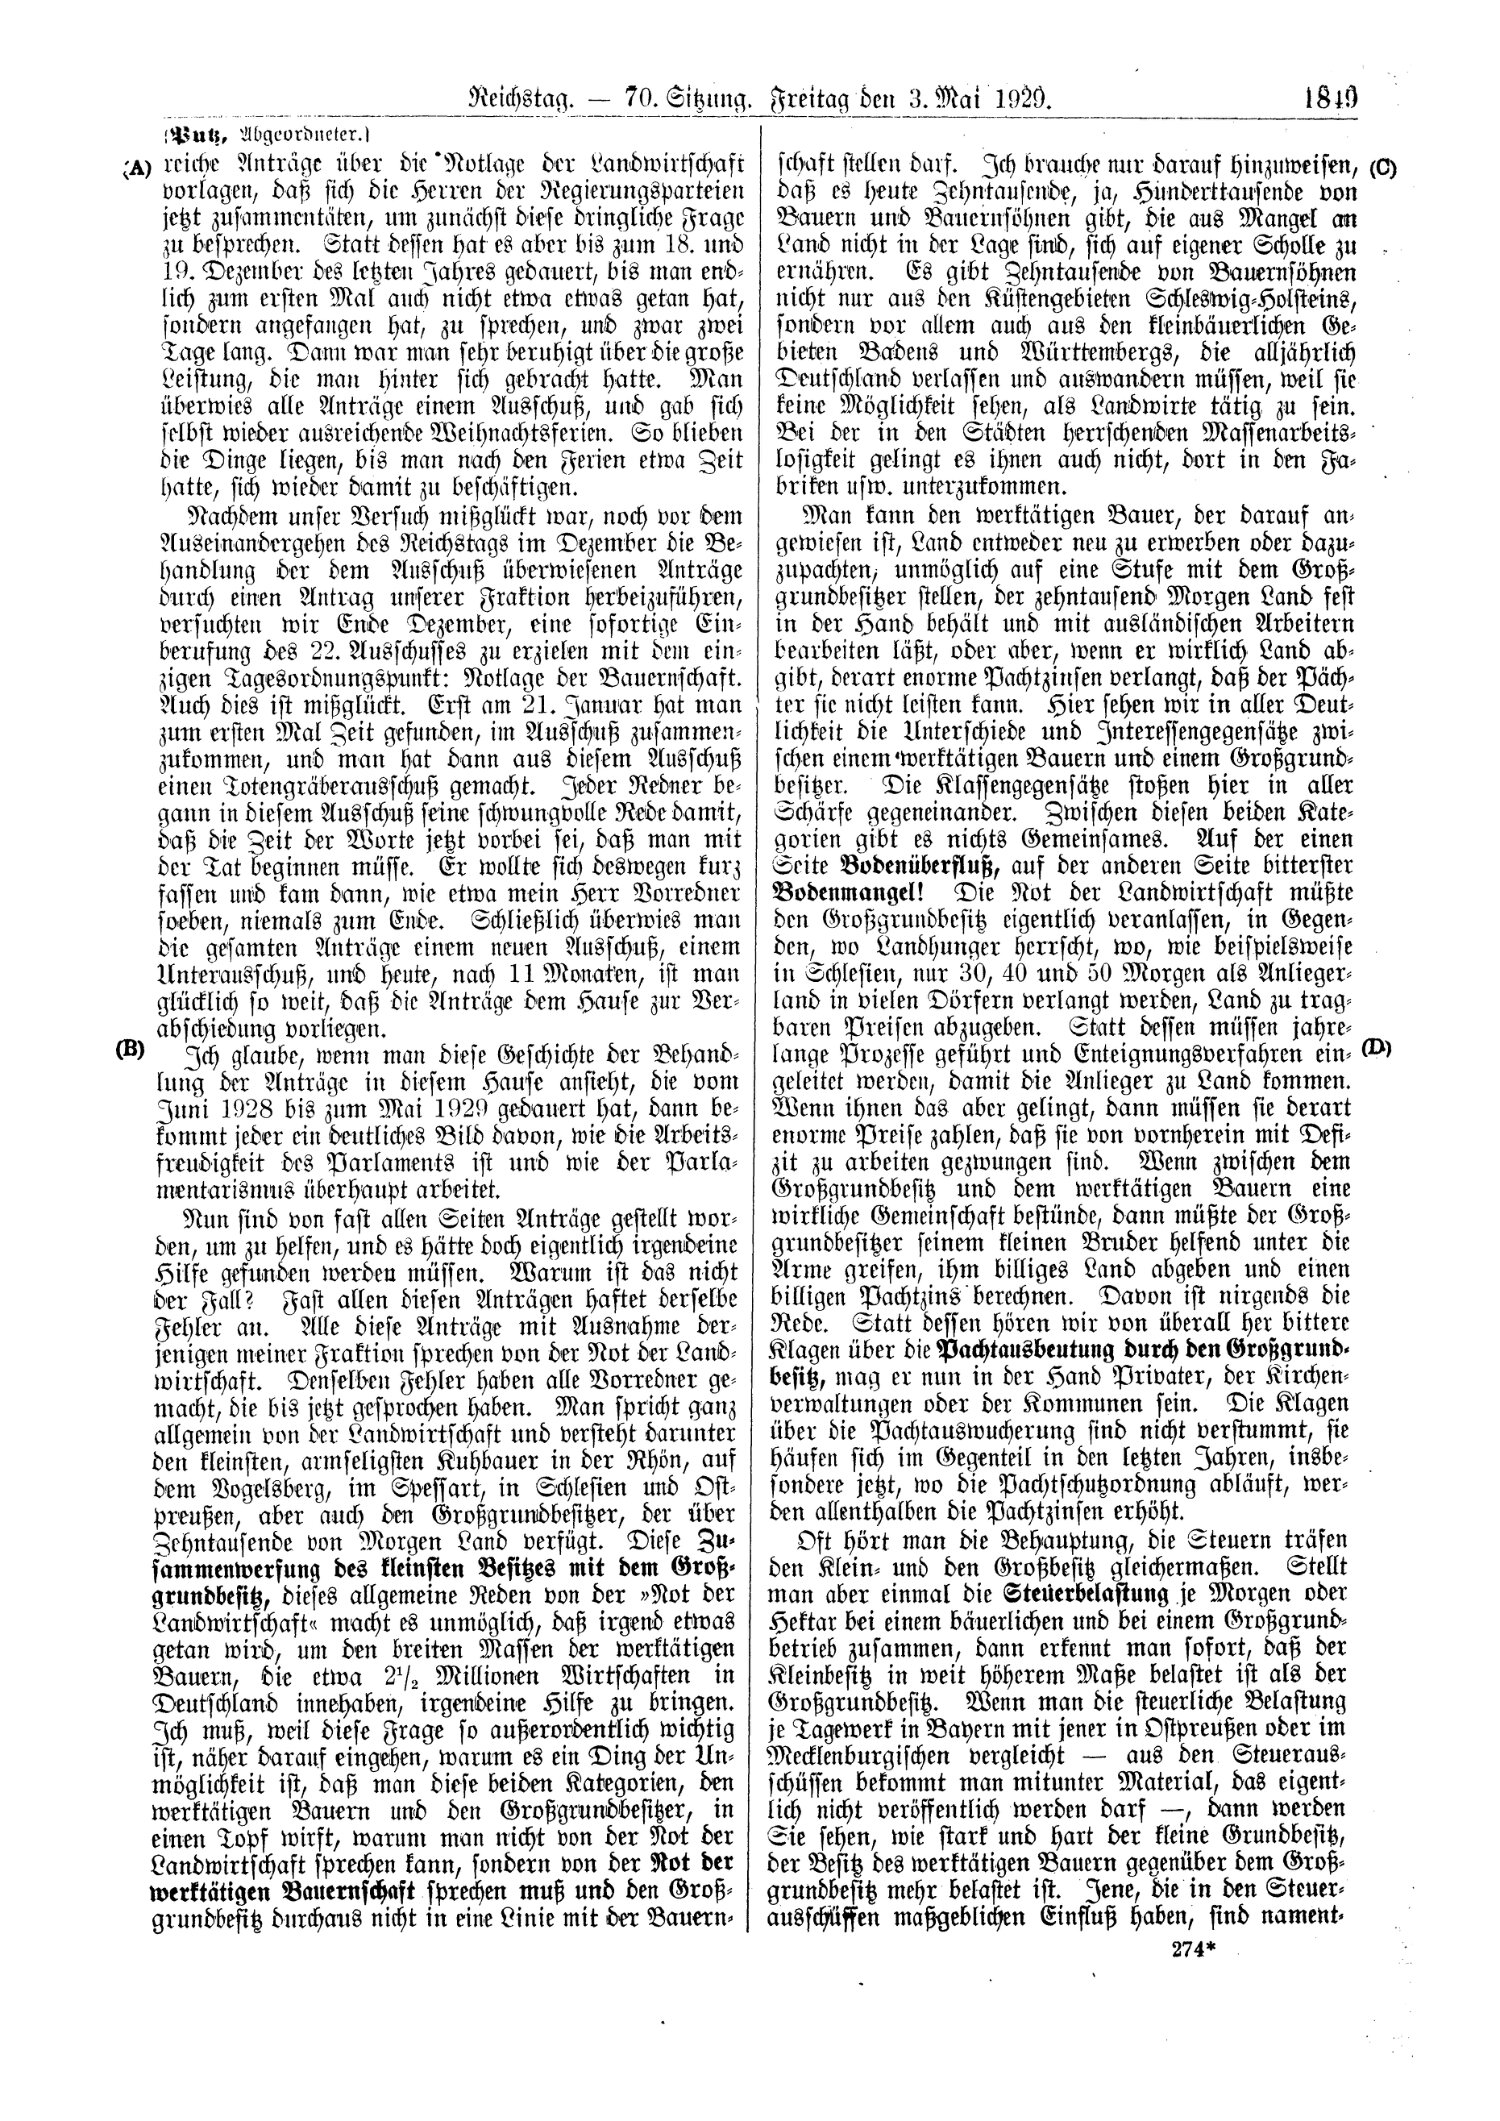 Scan of page 1849